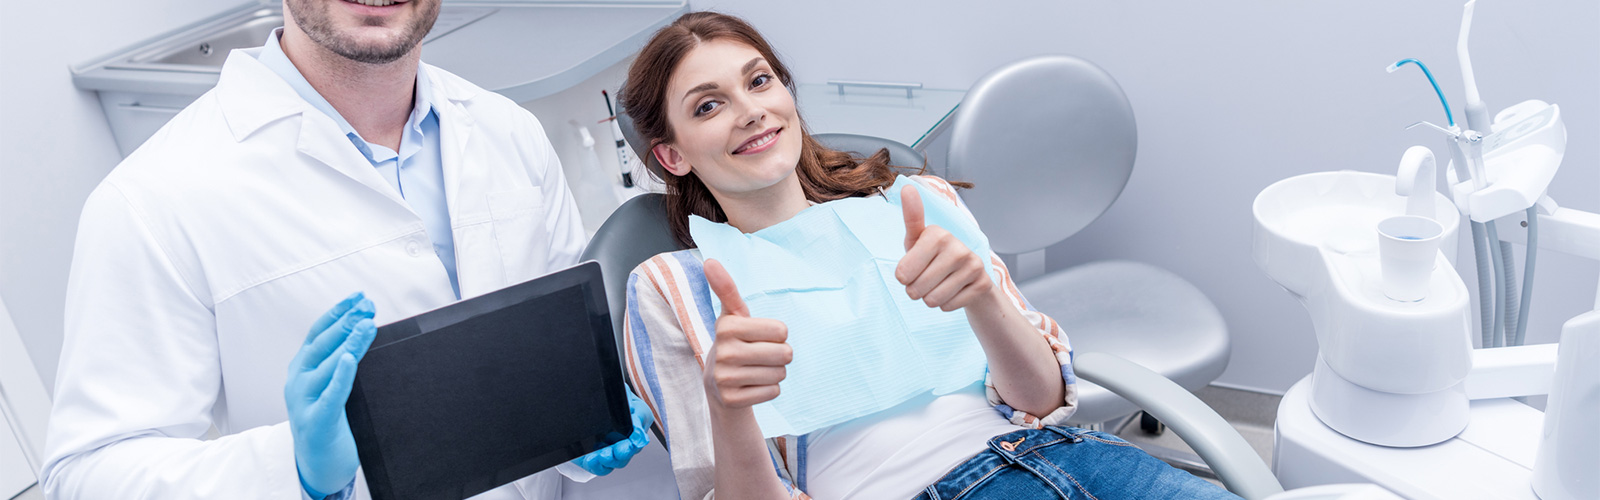 Happy patient showing thumbs-up in the dentist chair with the doctor